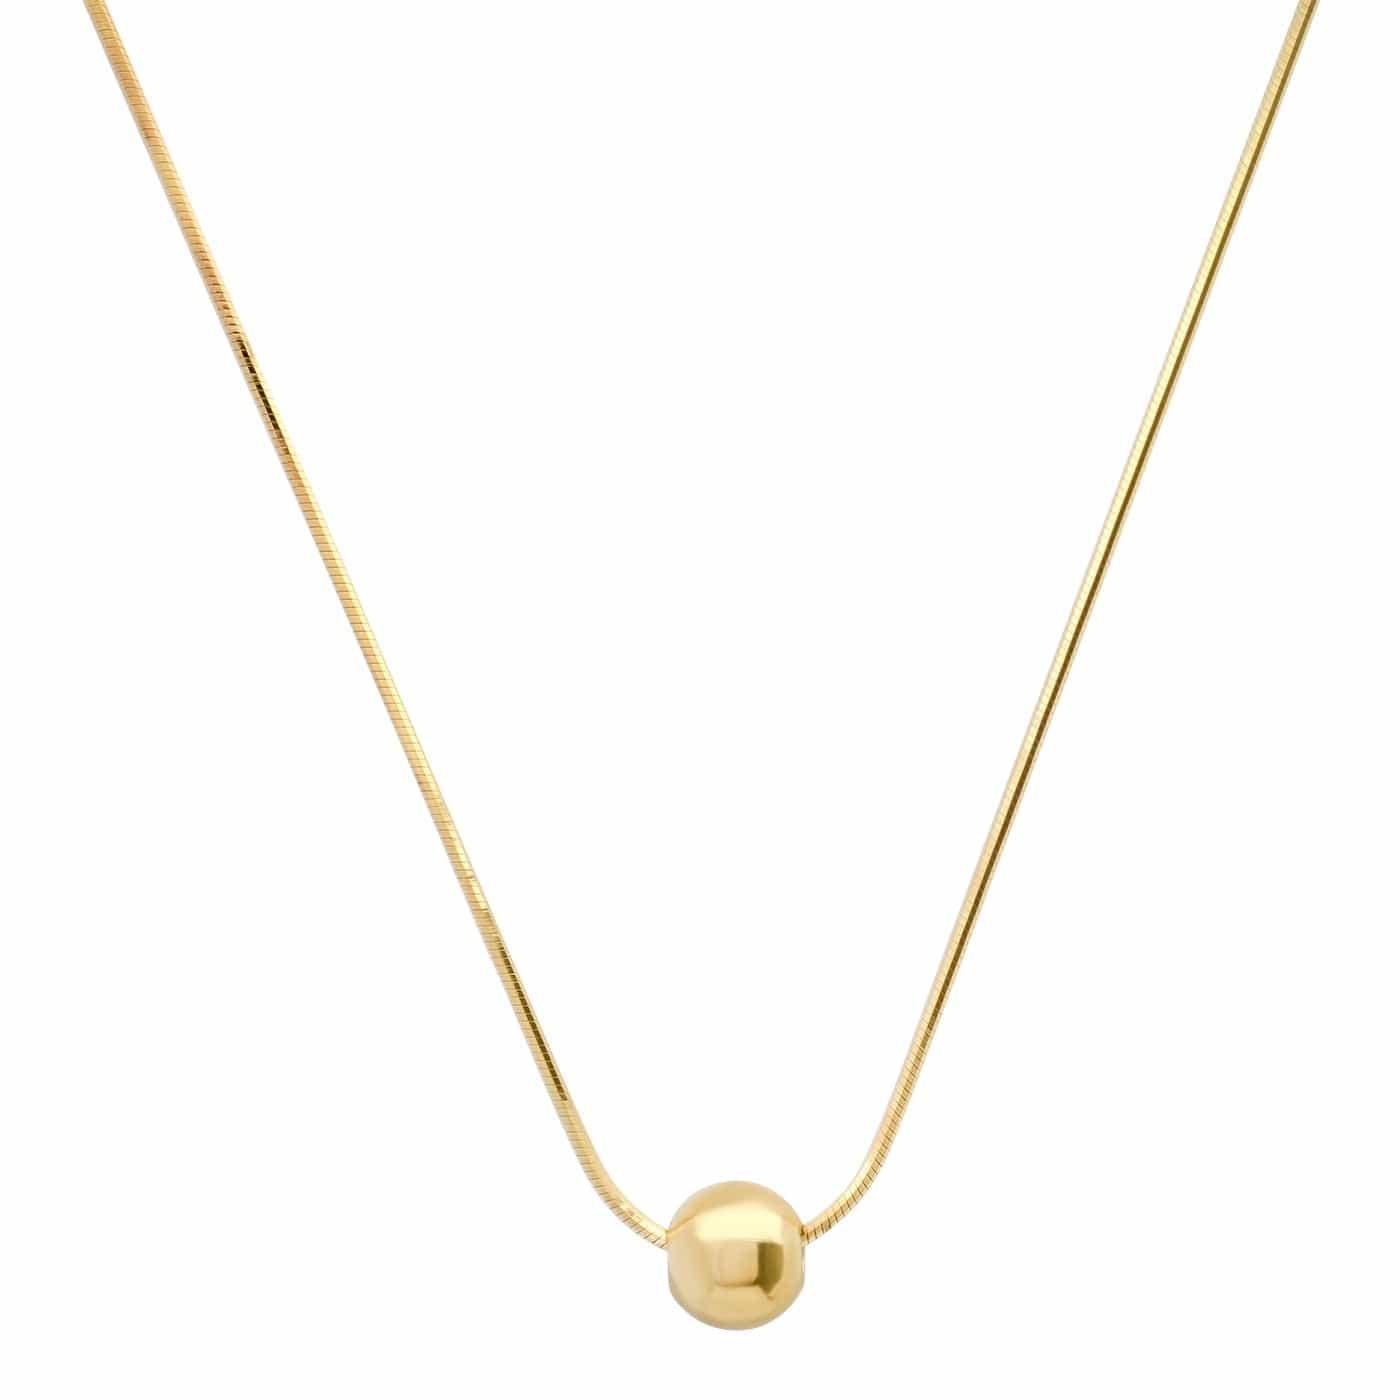 Snake Chain with Single Gold Ball